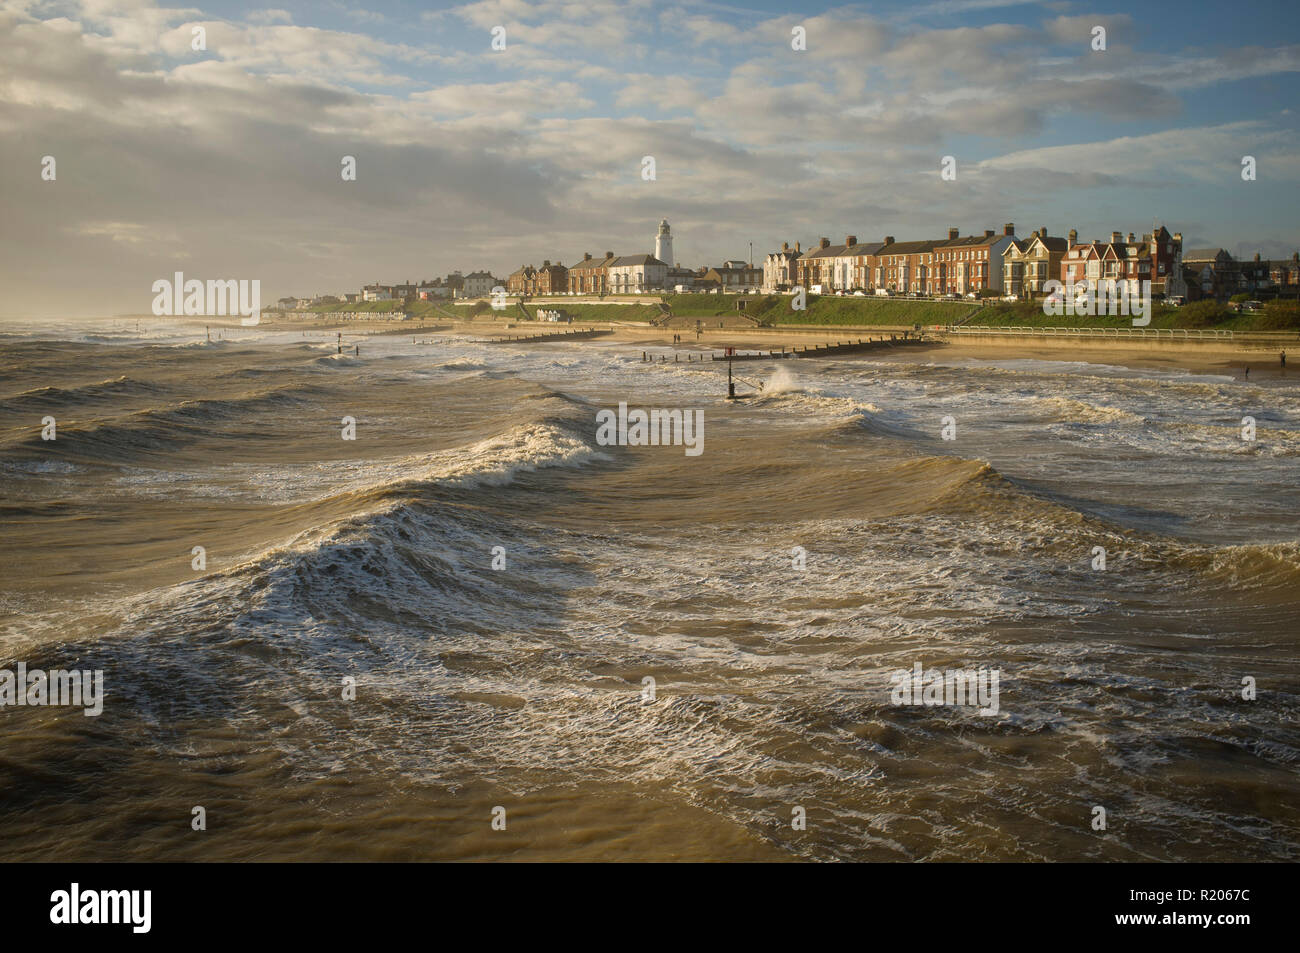 Rough seas in Winter at Southwold, Suffolk Stock Photo